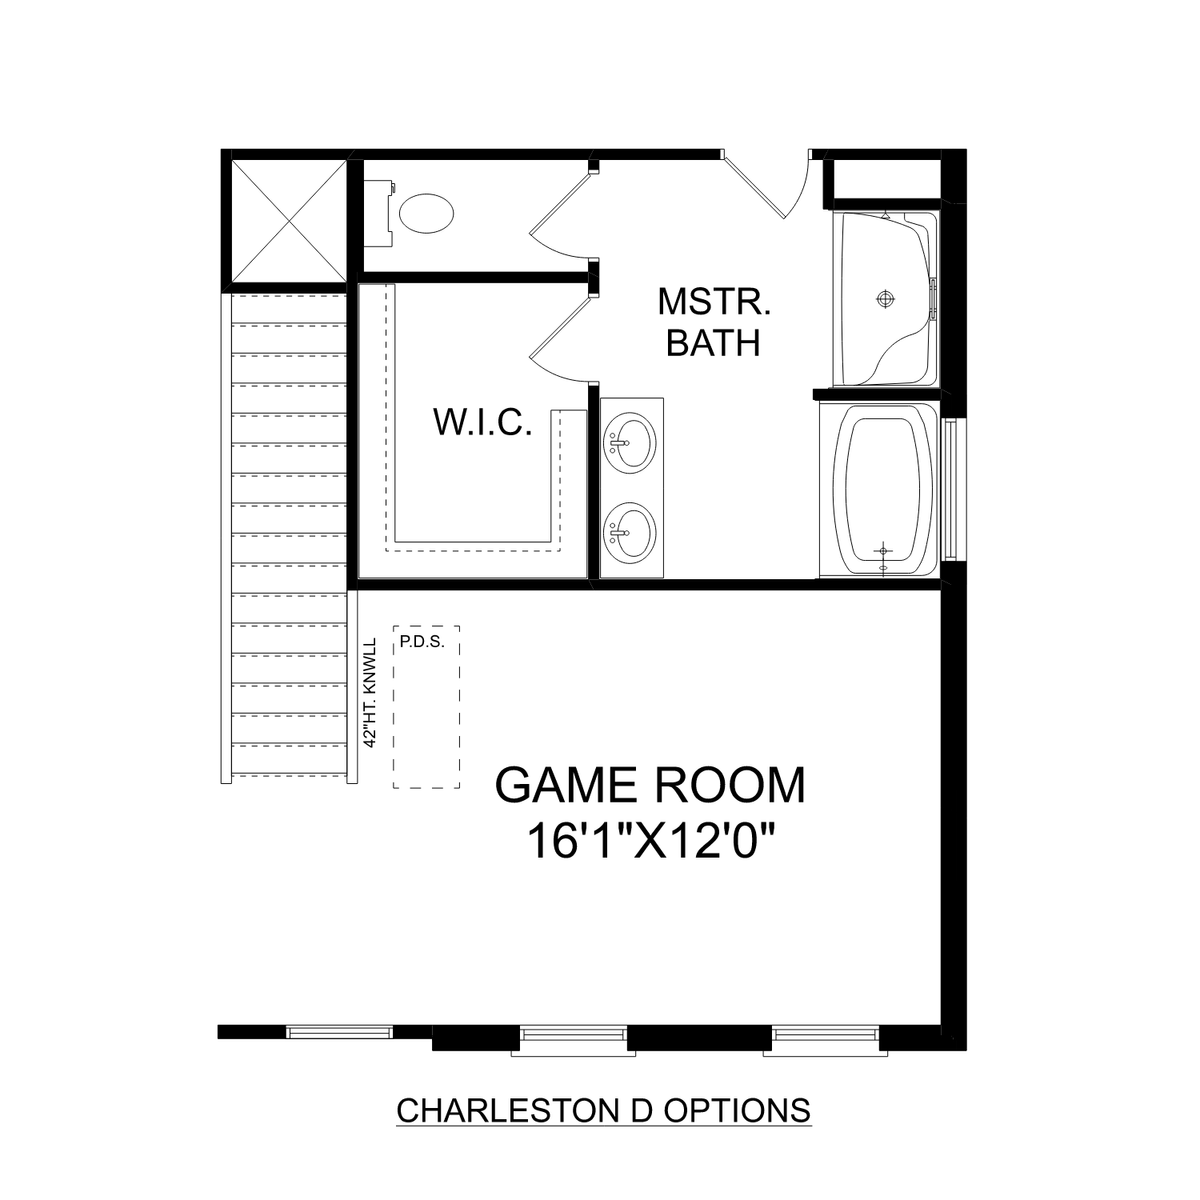 3 - The Charleston D buildable floor plan layout in Davidson Homes' Ricketts Farm community.